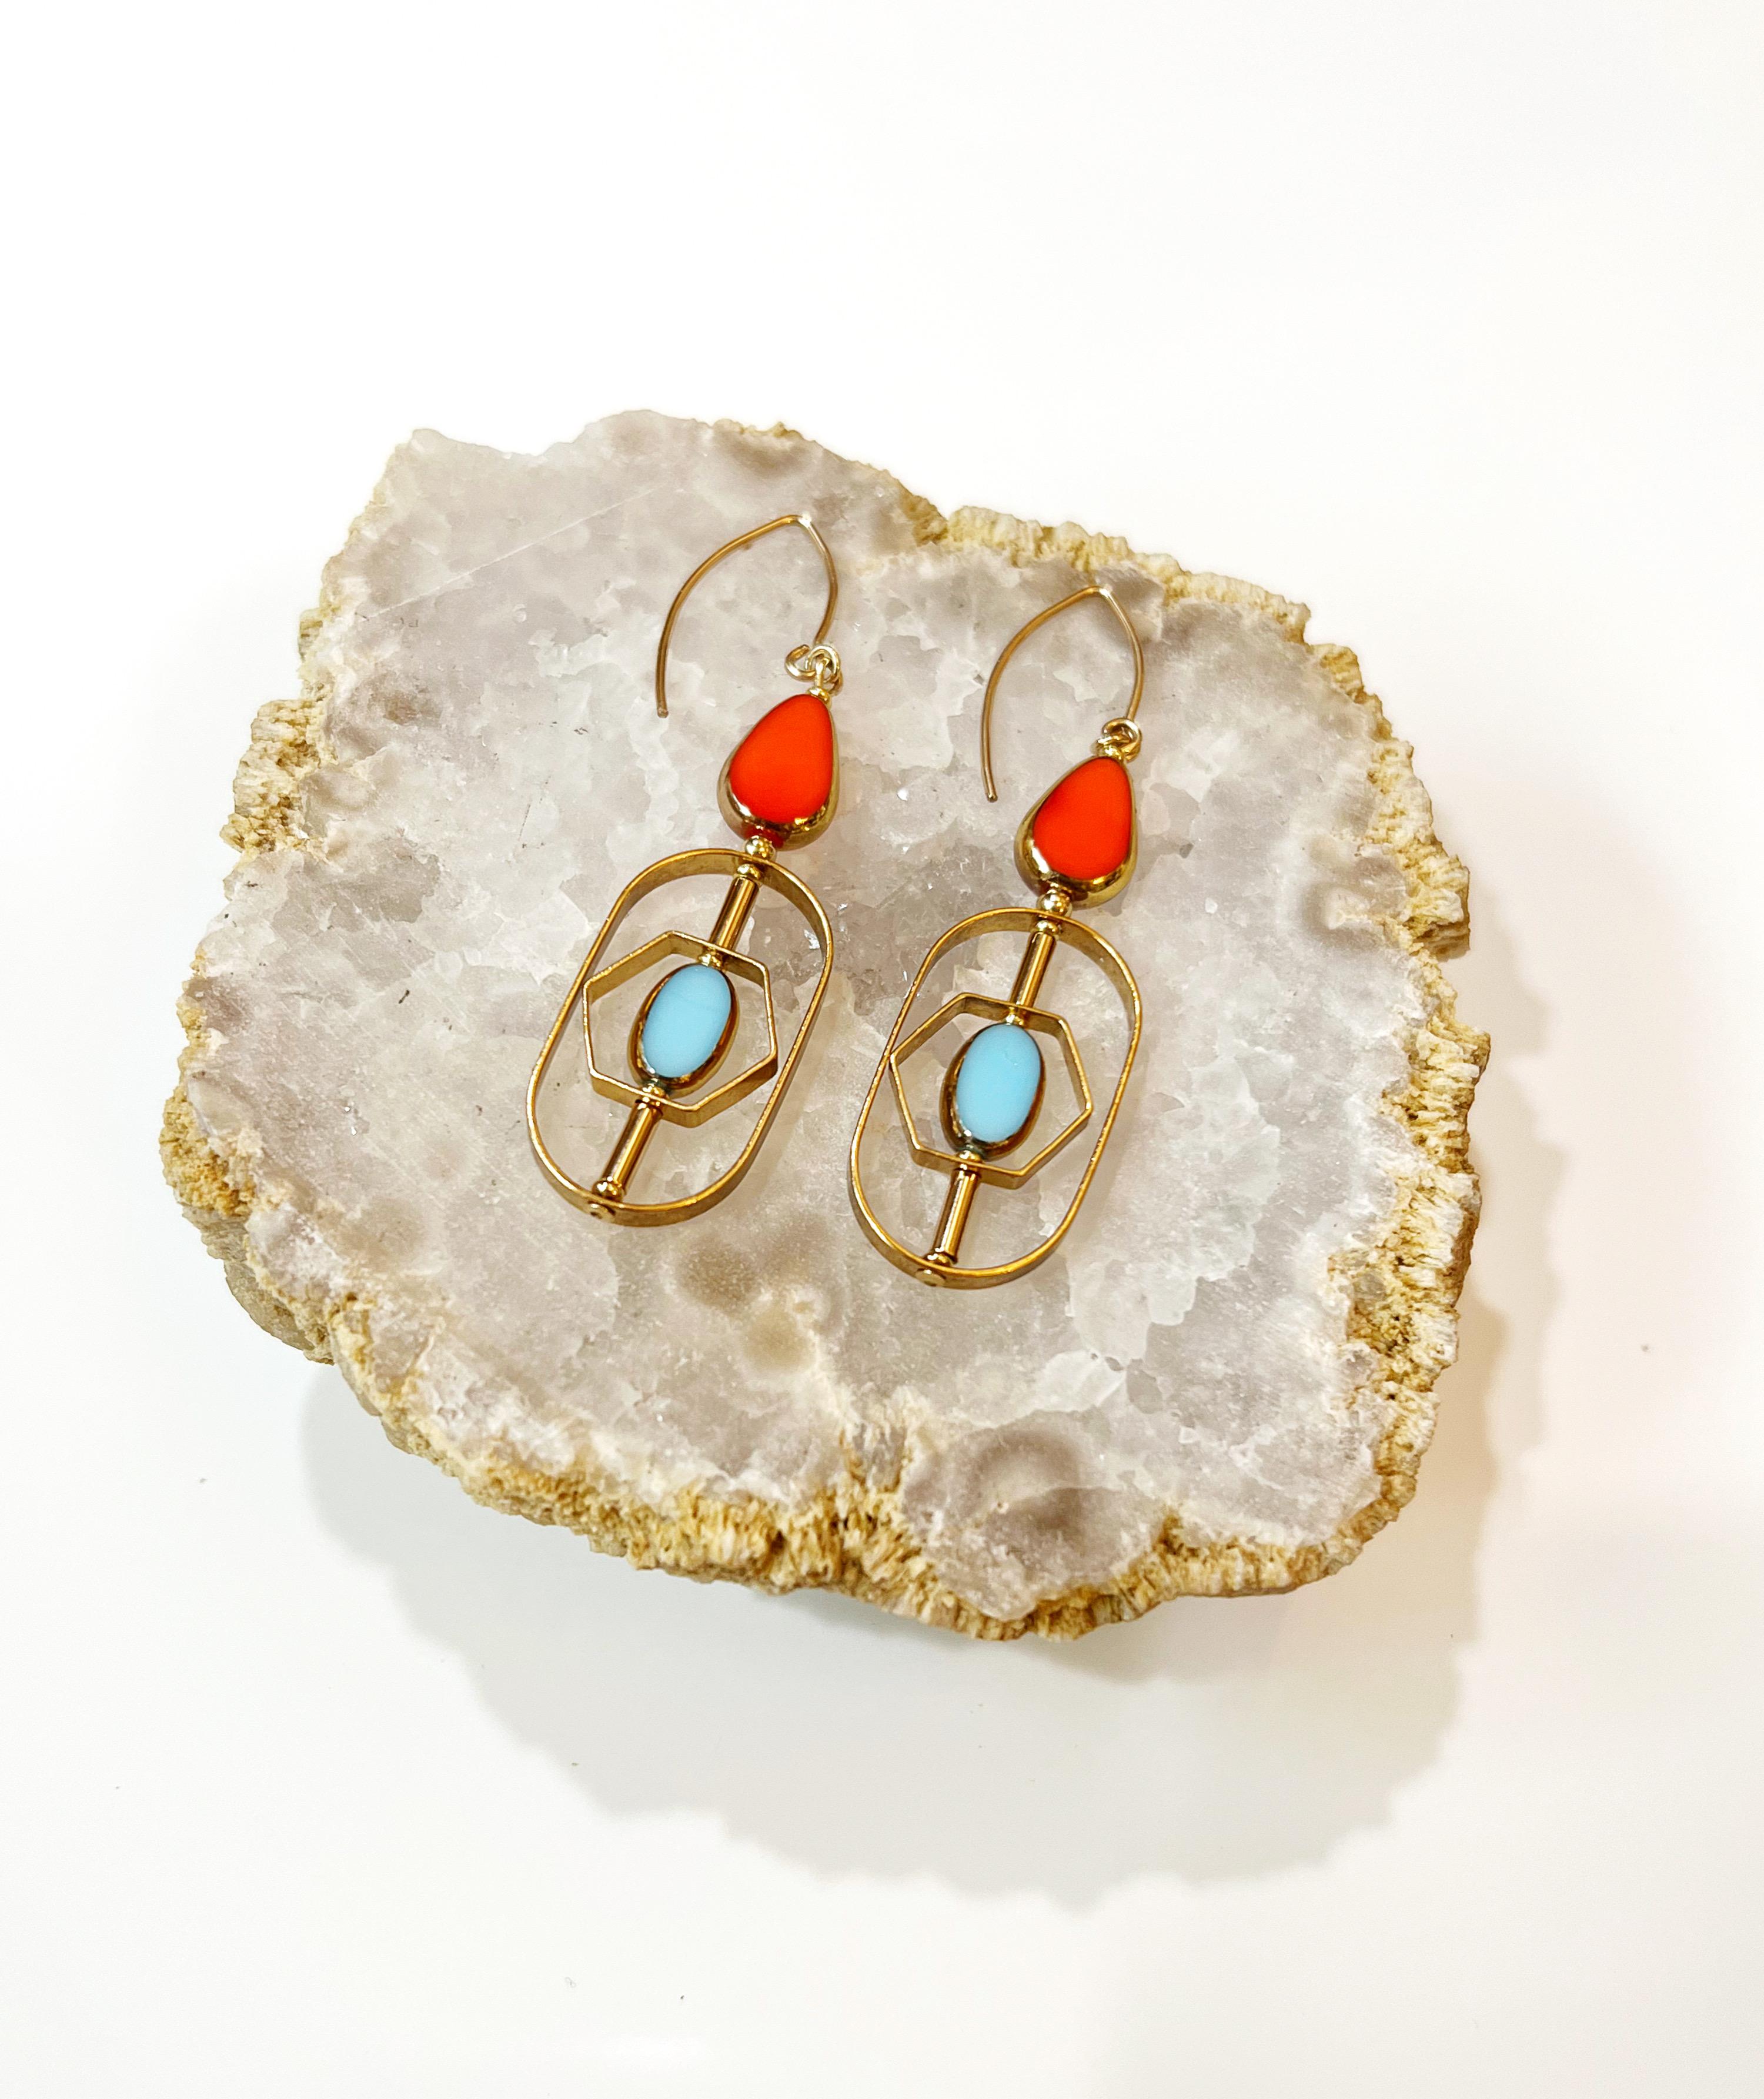 The earrings are light weight and are made to rotate and reposition with movement.
The earrings consist of an orange teardrop and a baby blue oval shaped beads. They are new old stock vintage German glass beads that are framed with 24K gold. The